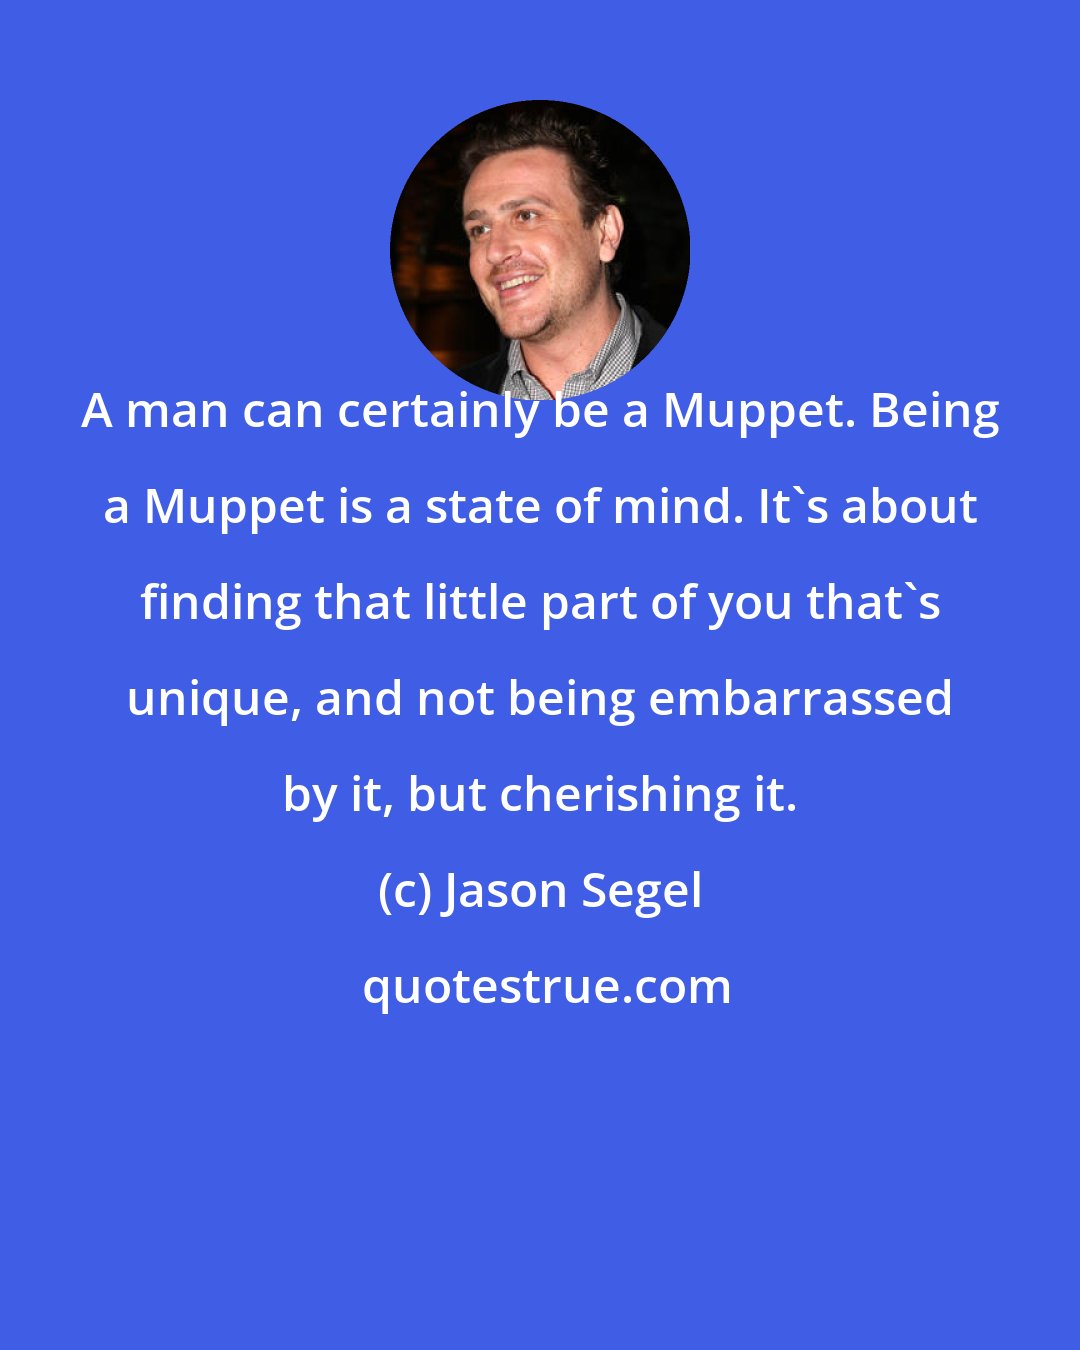 Jason Segel: A man can certainly be a Muppet. Being a Muppet is a state of mind. It's about finding that little part of you that's unique, and not being embarrassed by it, but cherishing it.